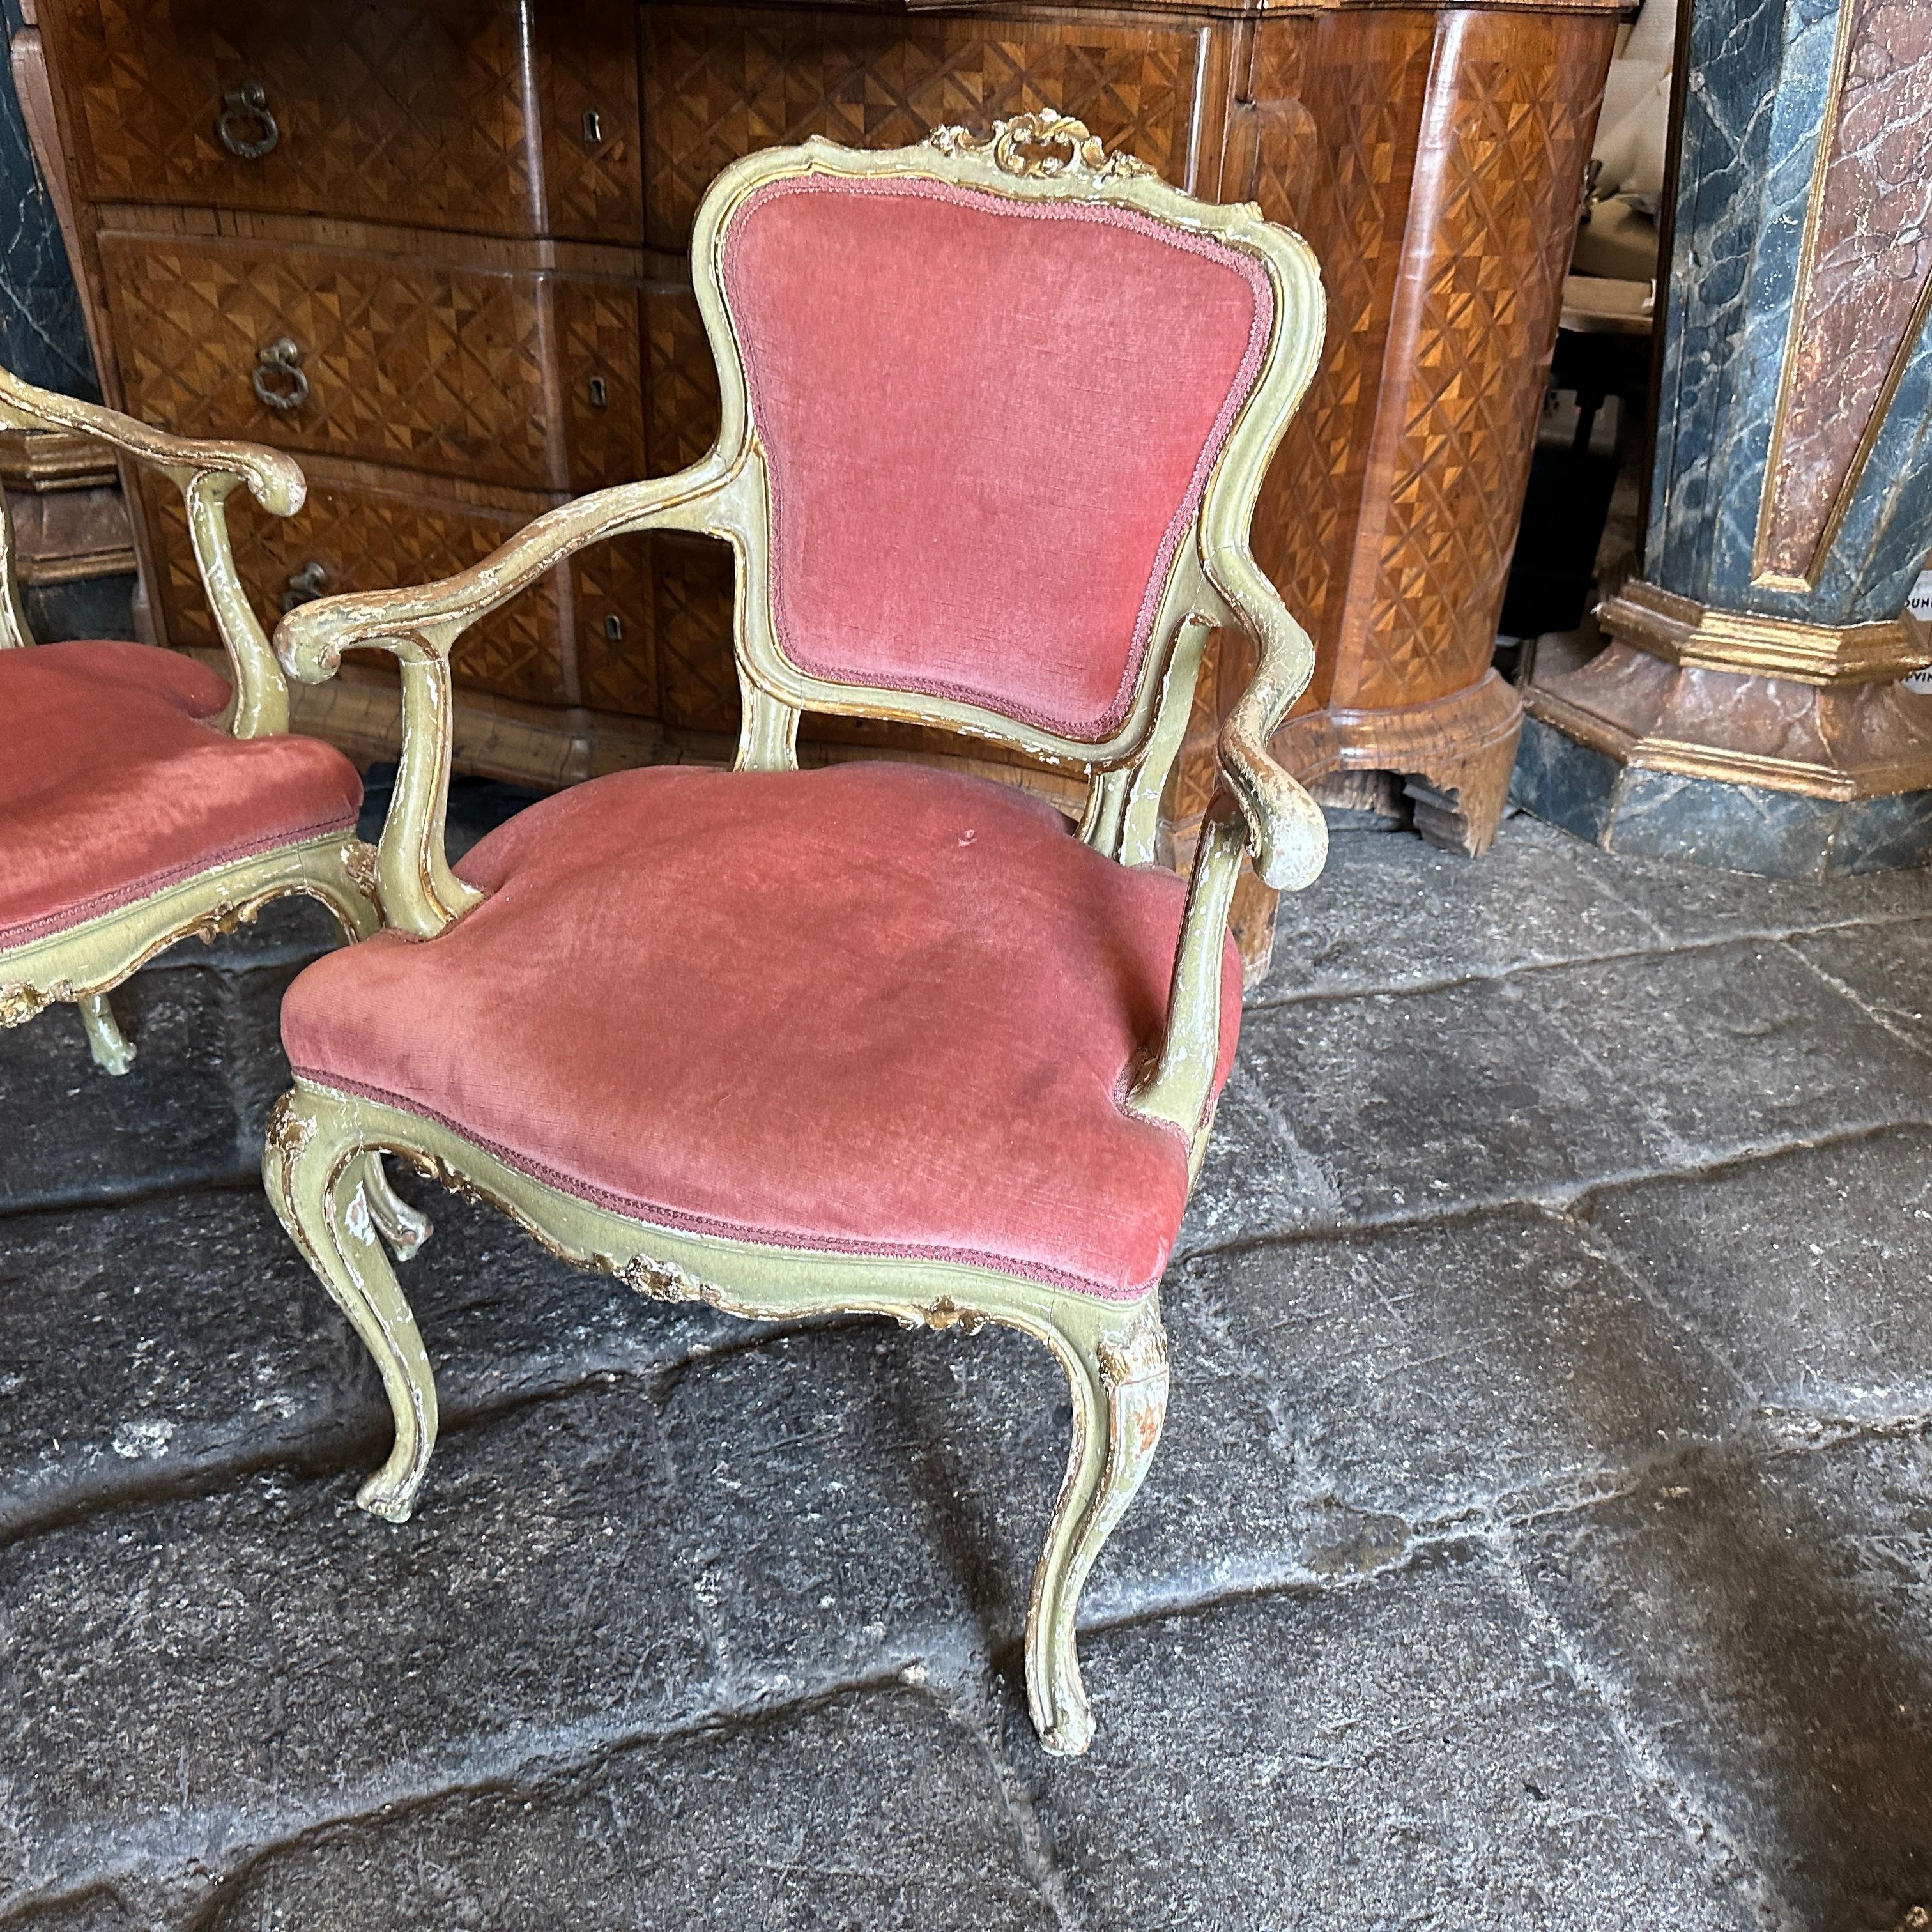 A 19th-century set of two green lacquered wood Venetian armchairs exudes elegance and craftsmanship typical of the period. These armchairs, originating from Venice during the 1800s, boast intricate designs and attention to detail, they are in